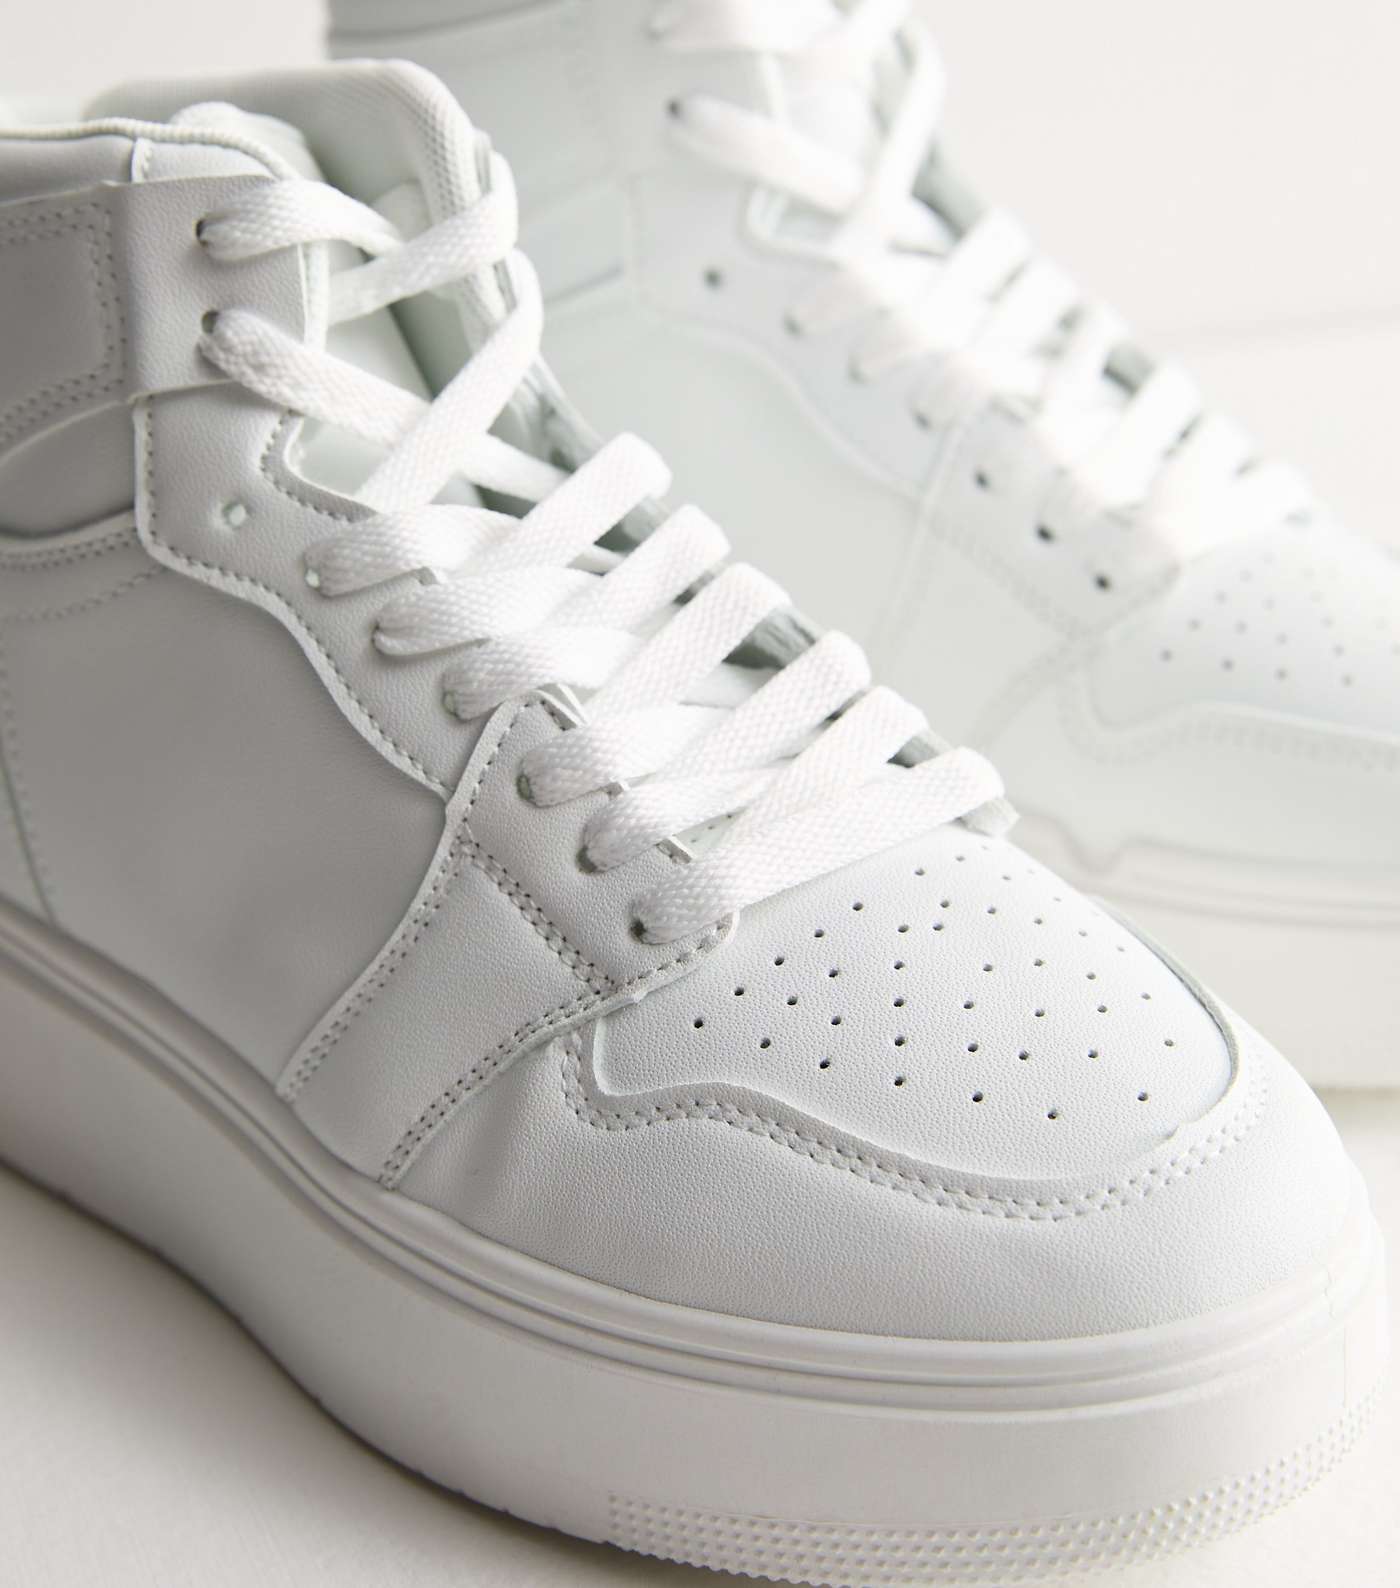 Truffle White Leather-Look High Top Trainers Image 5